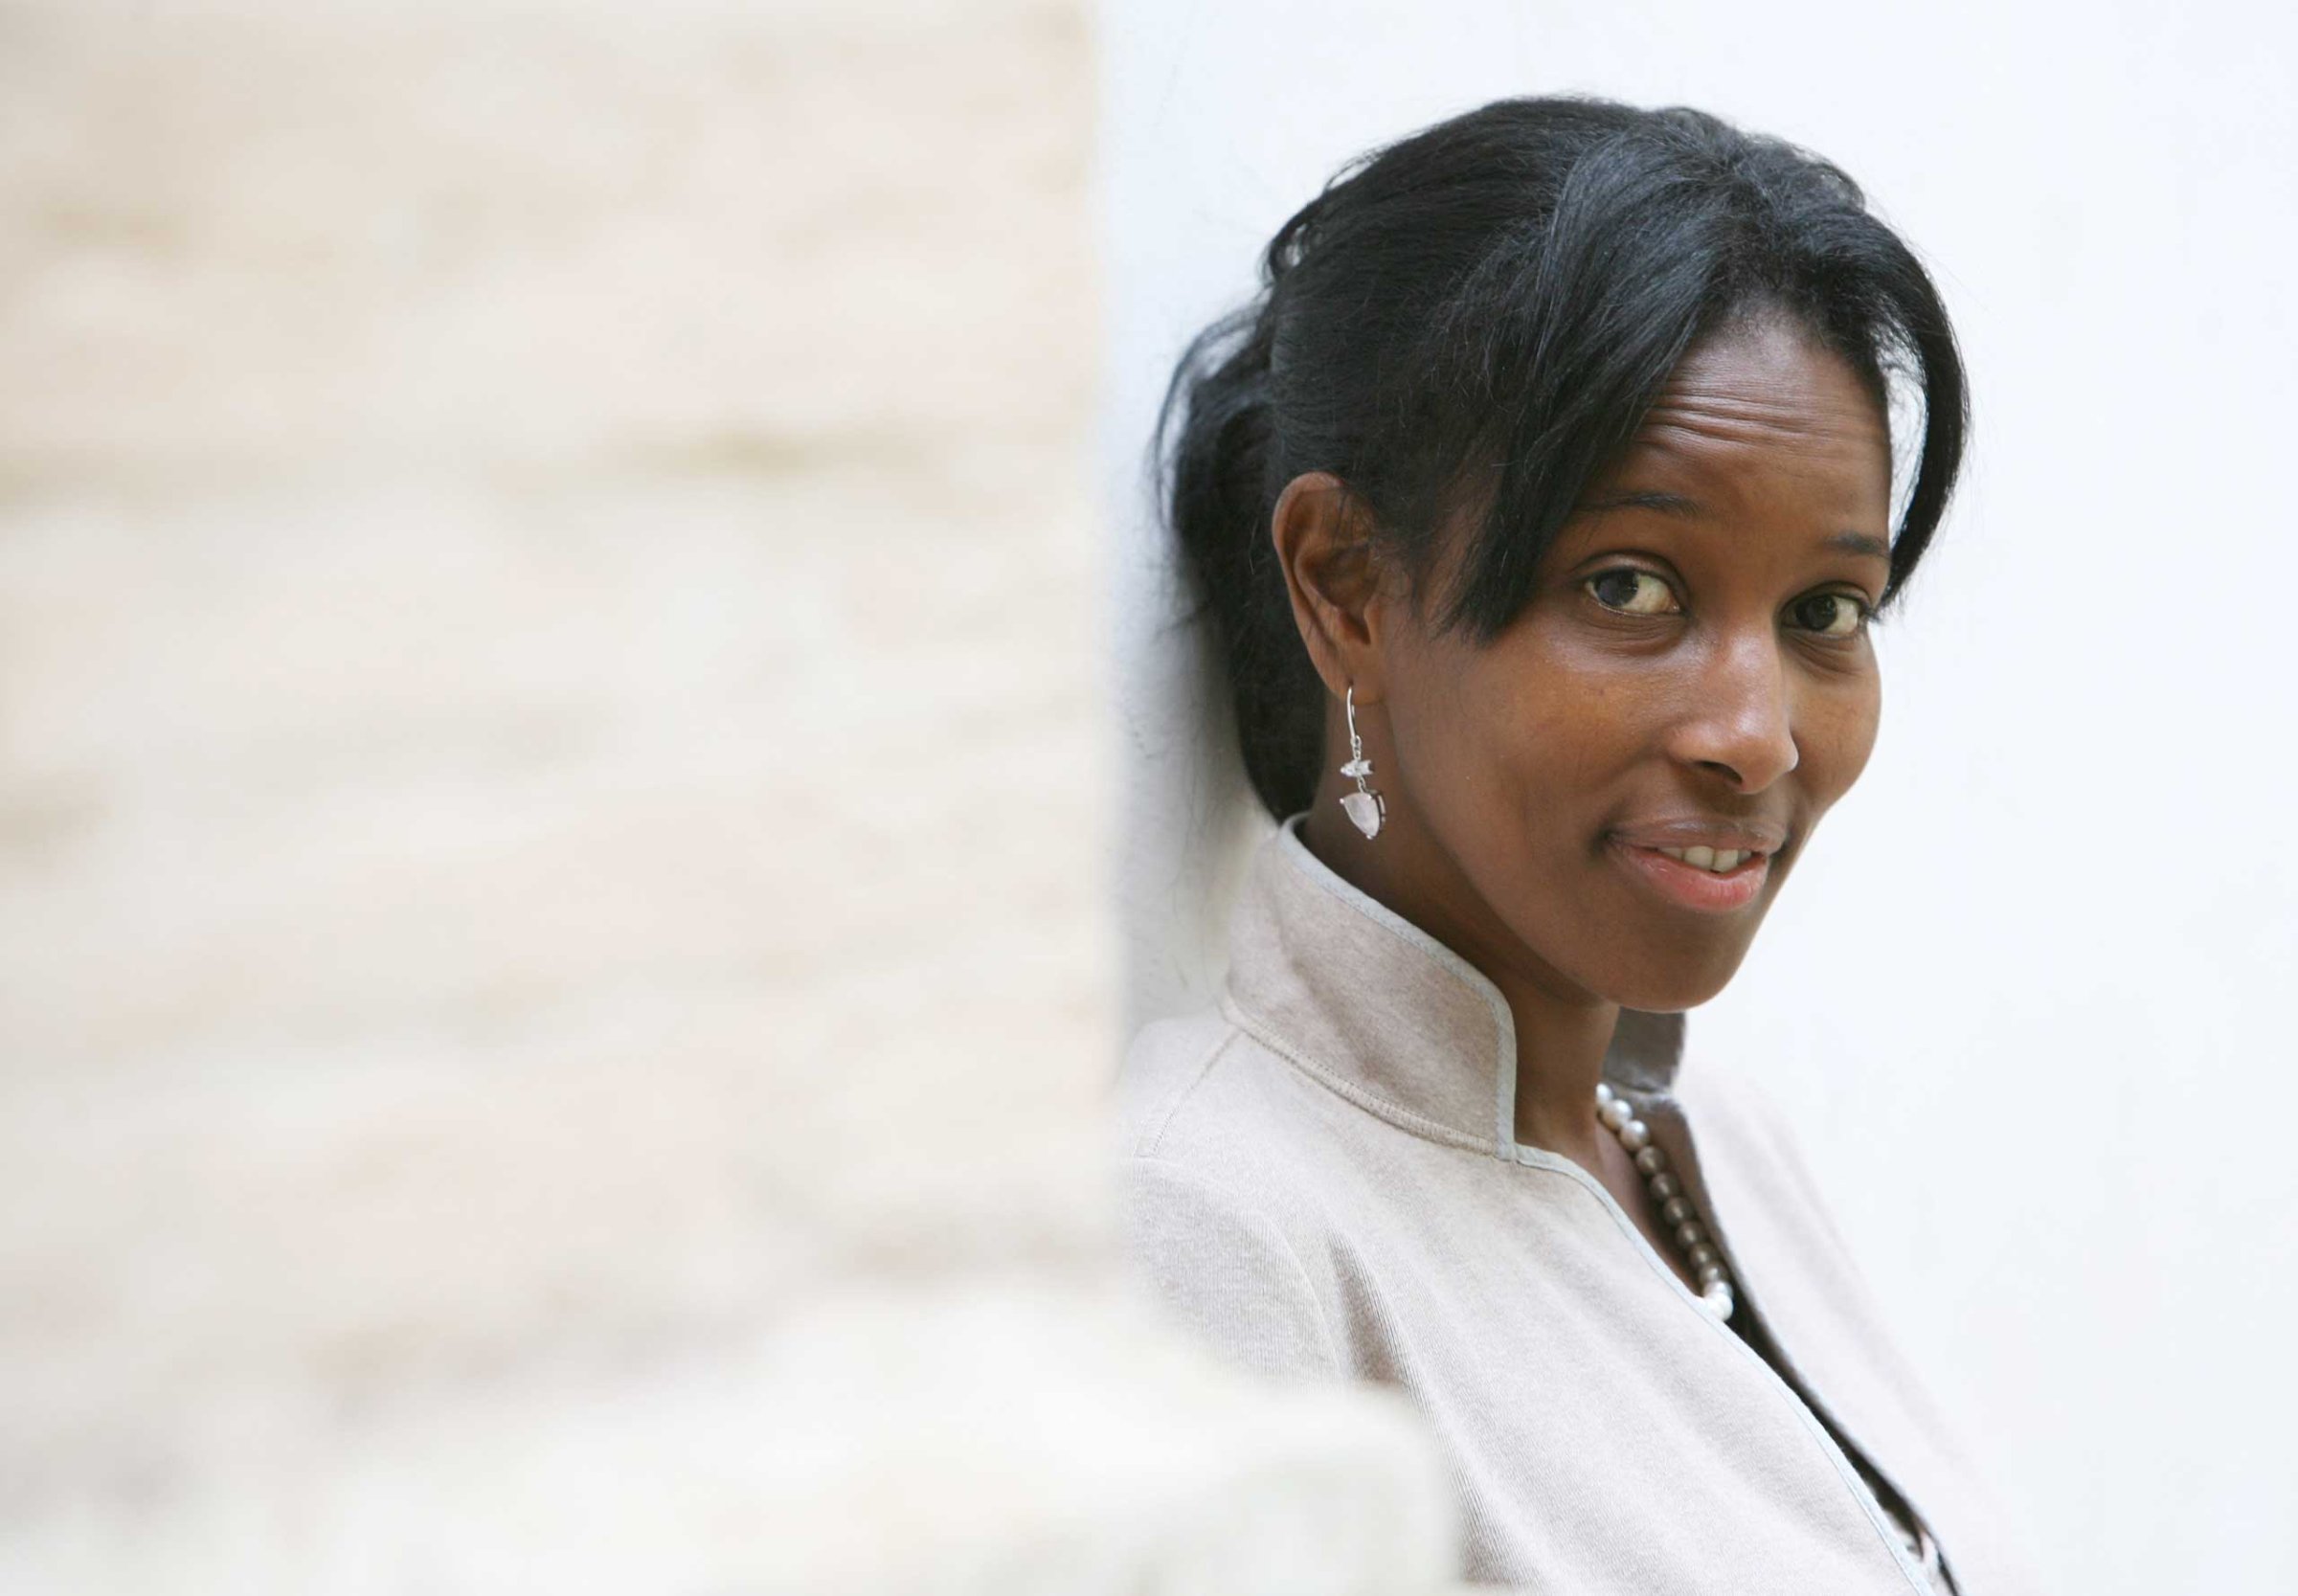 Somalian author Ayaan Hirsi Ali, former member of the Dutch parliament, in Rome in 2008.